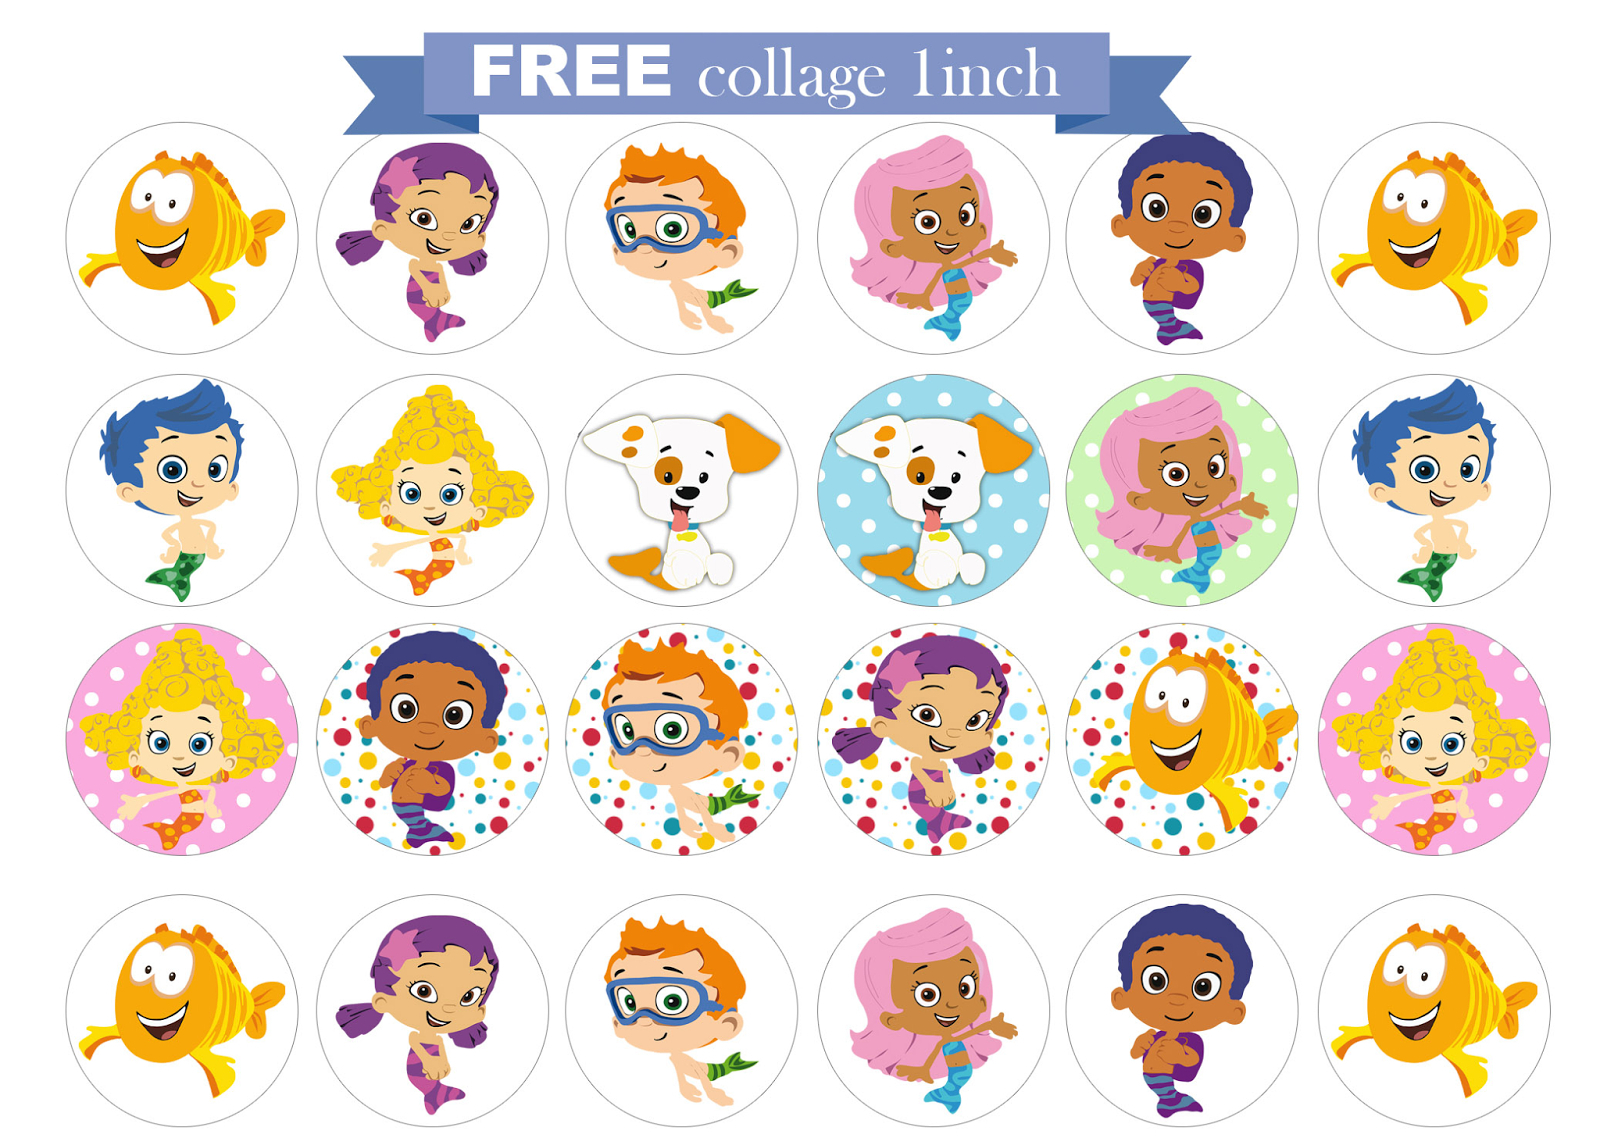 Bubble Guppies Birthday Banner Template – Atlantaauctionco Throughout Bubble Guppies Birthday Banner Template